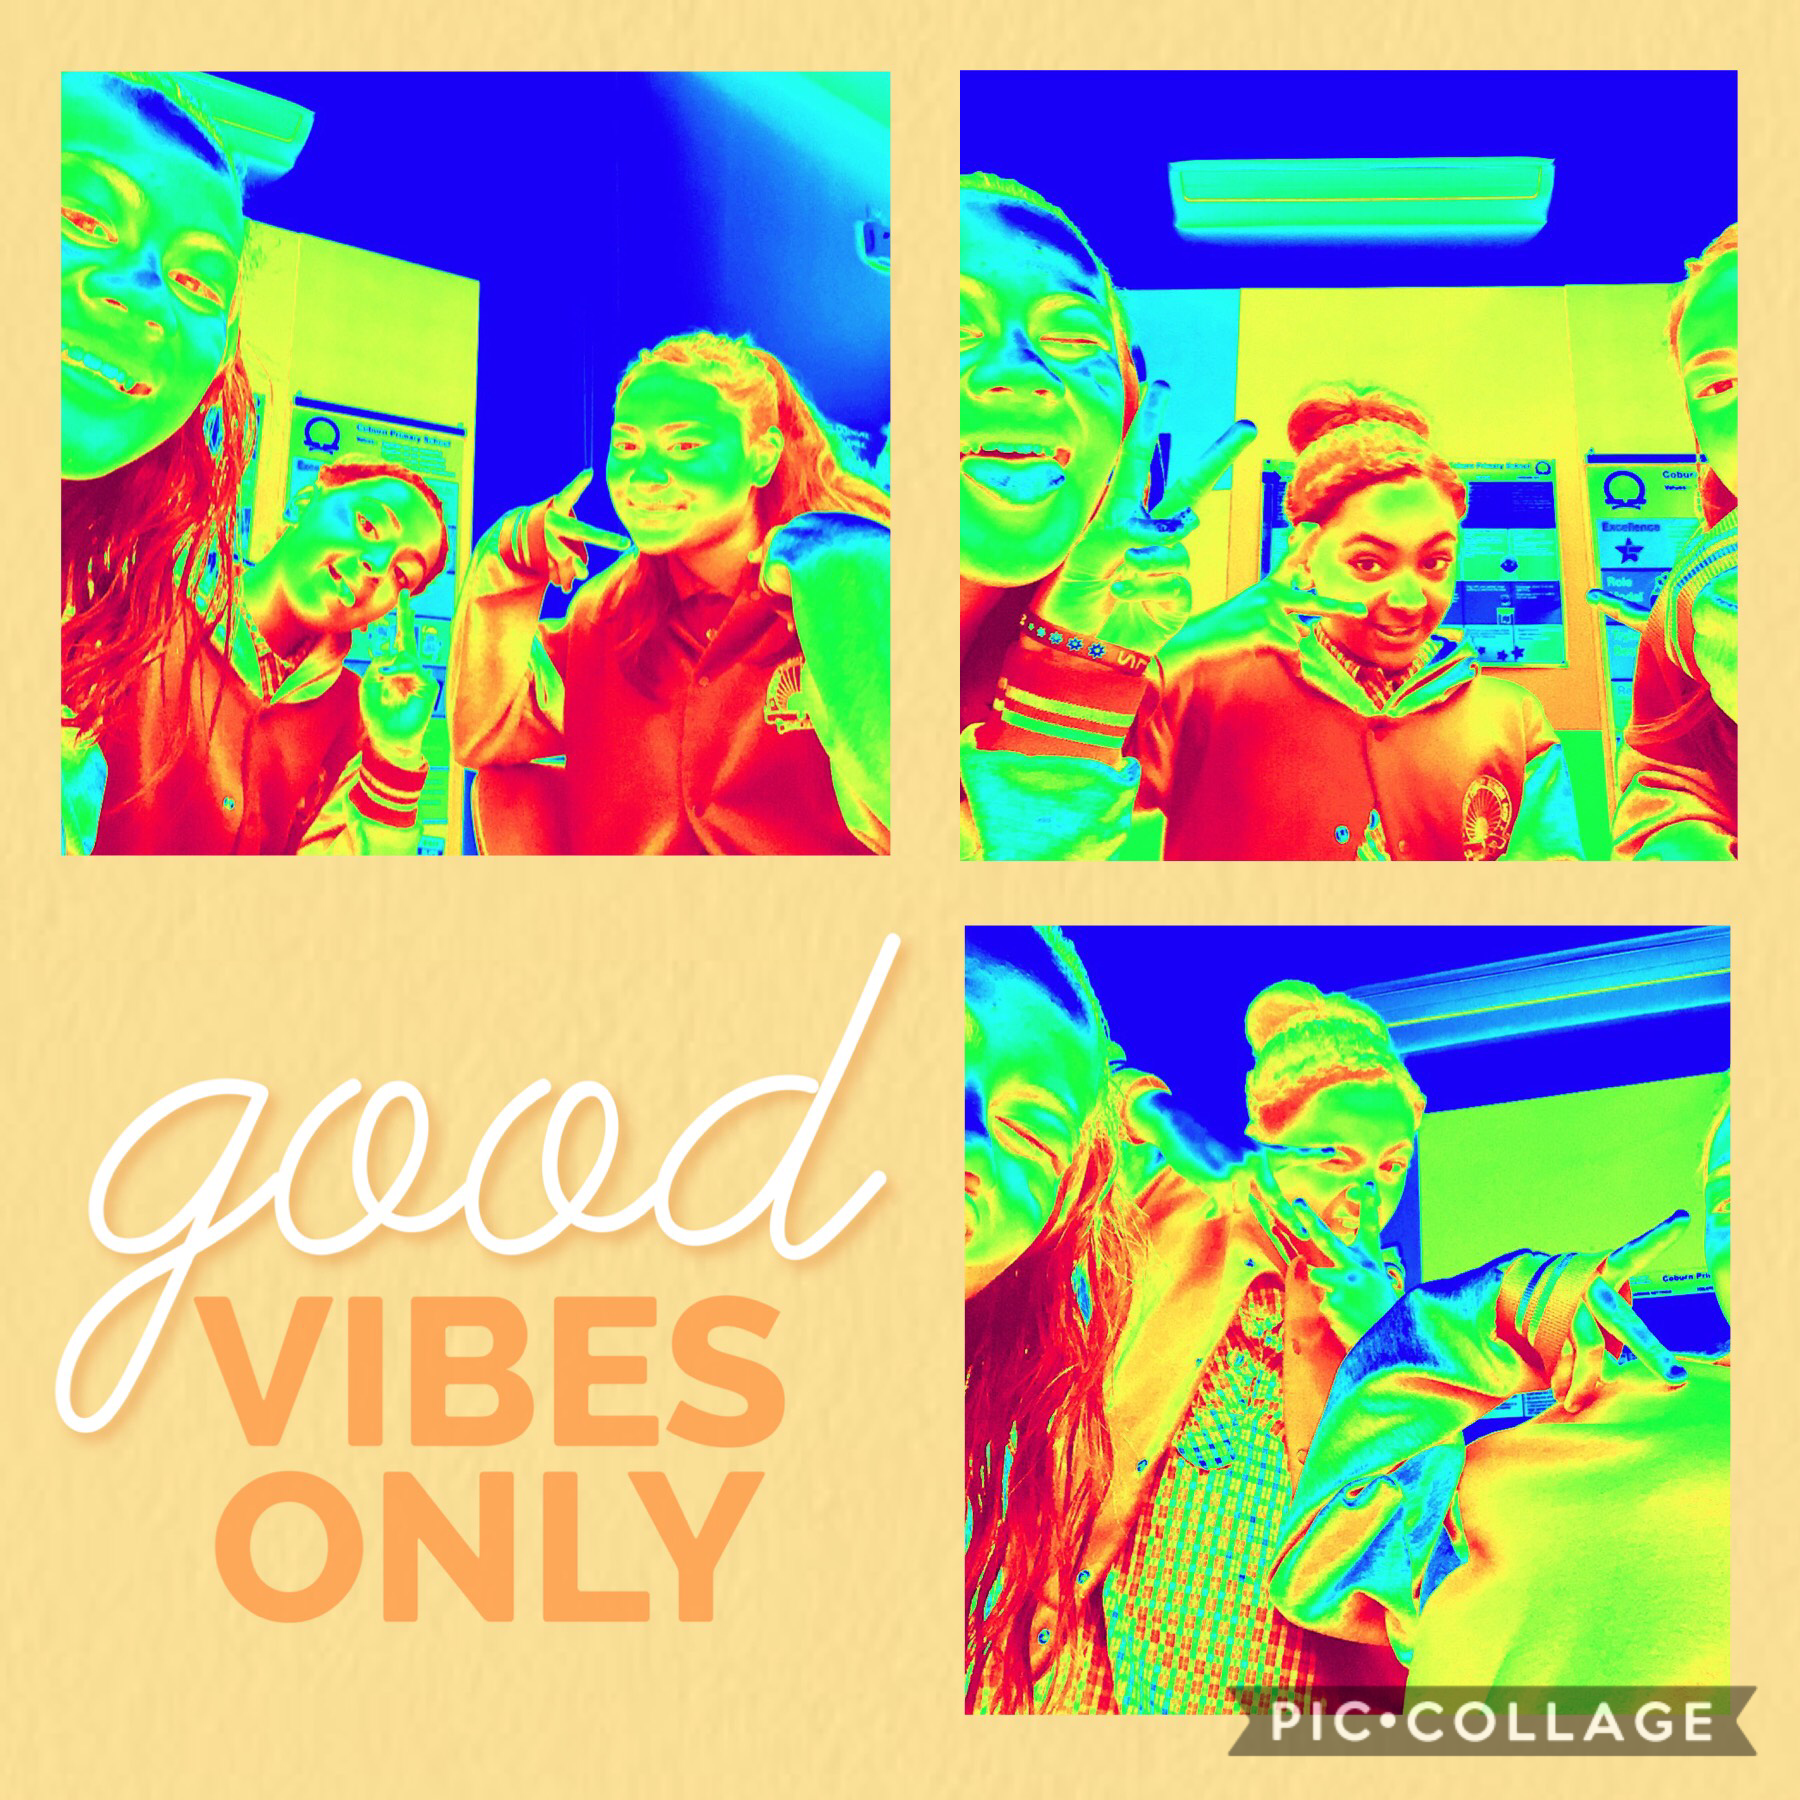 Good vibes only👍